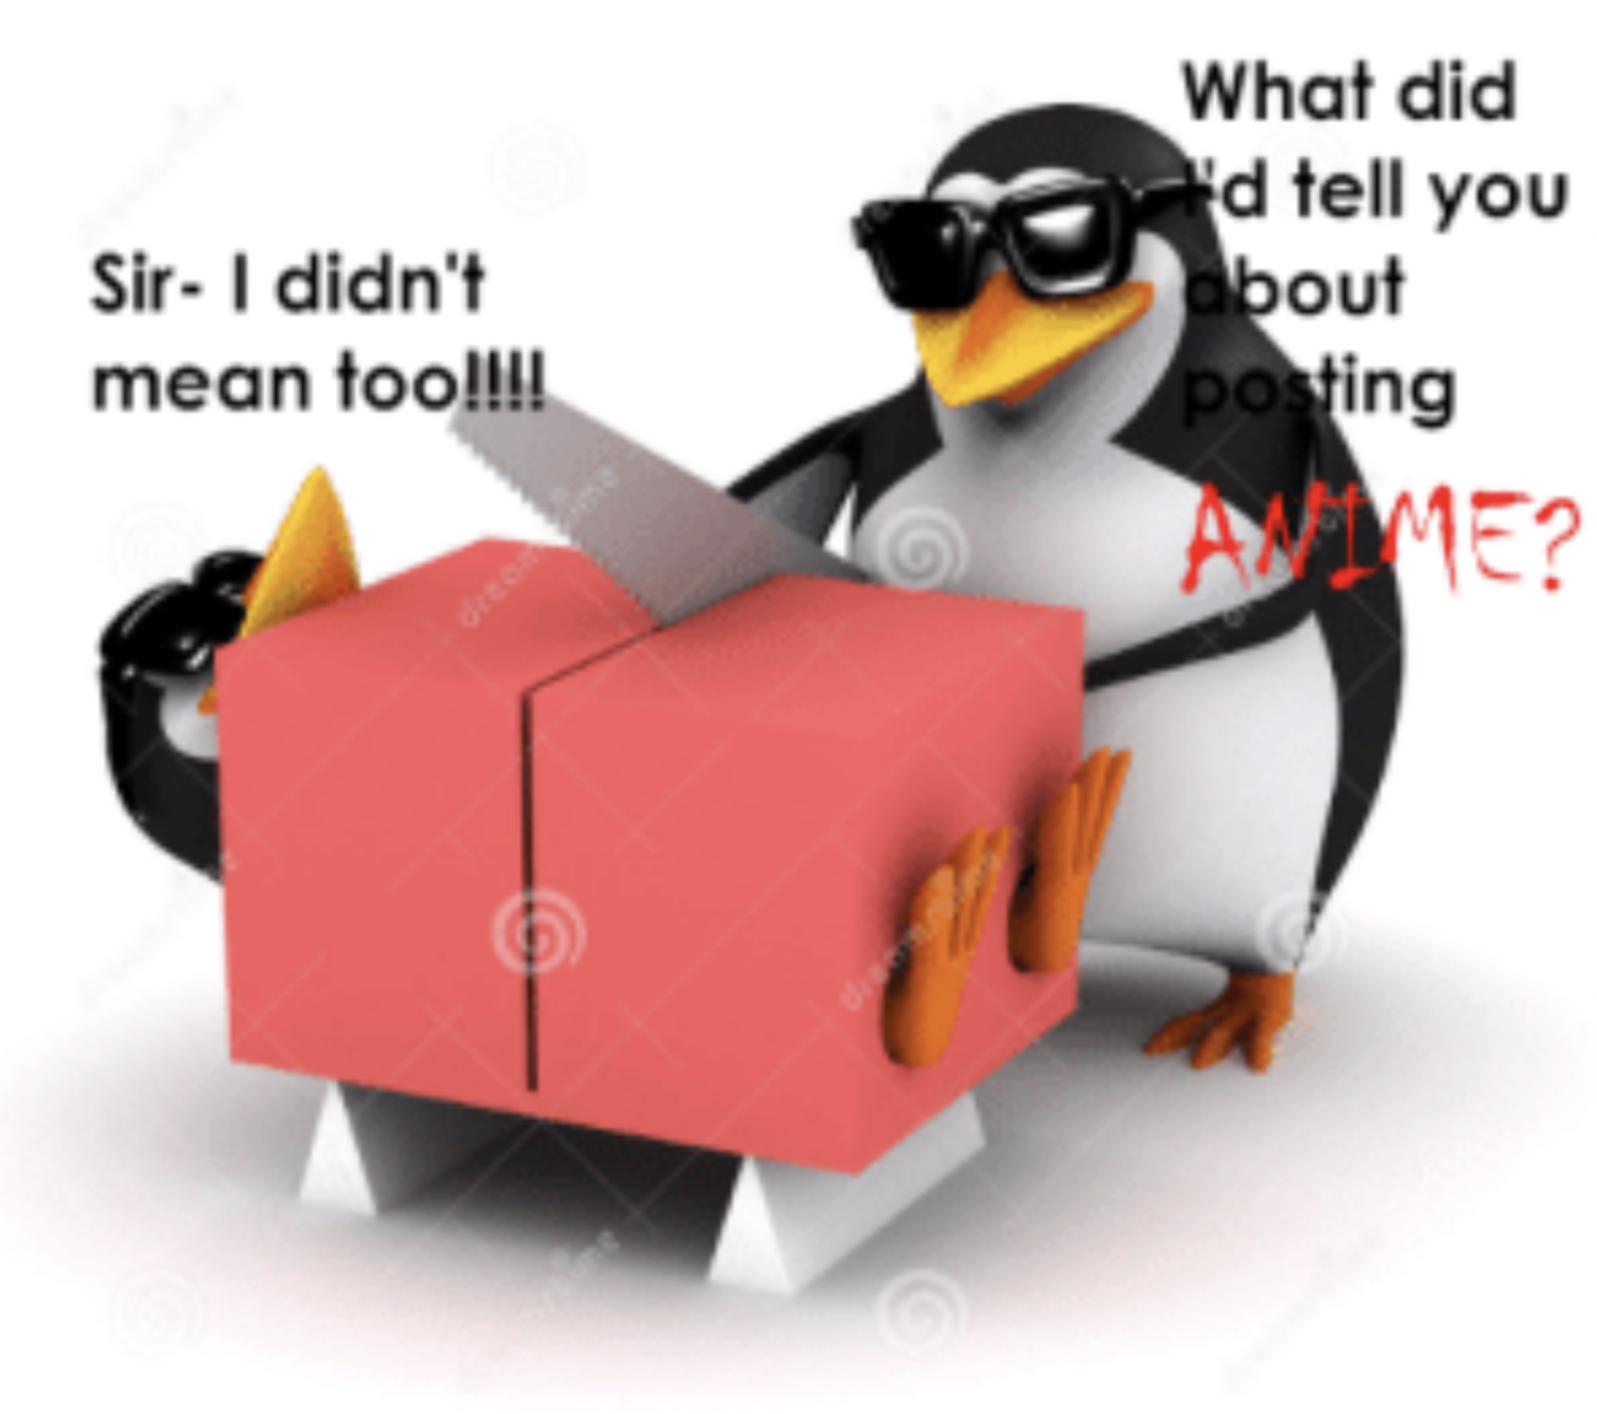 High Quality No anime penguin cuts someone posting anime Blank Meme Template